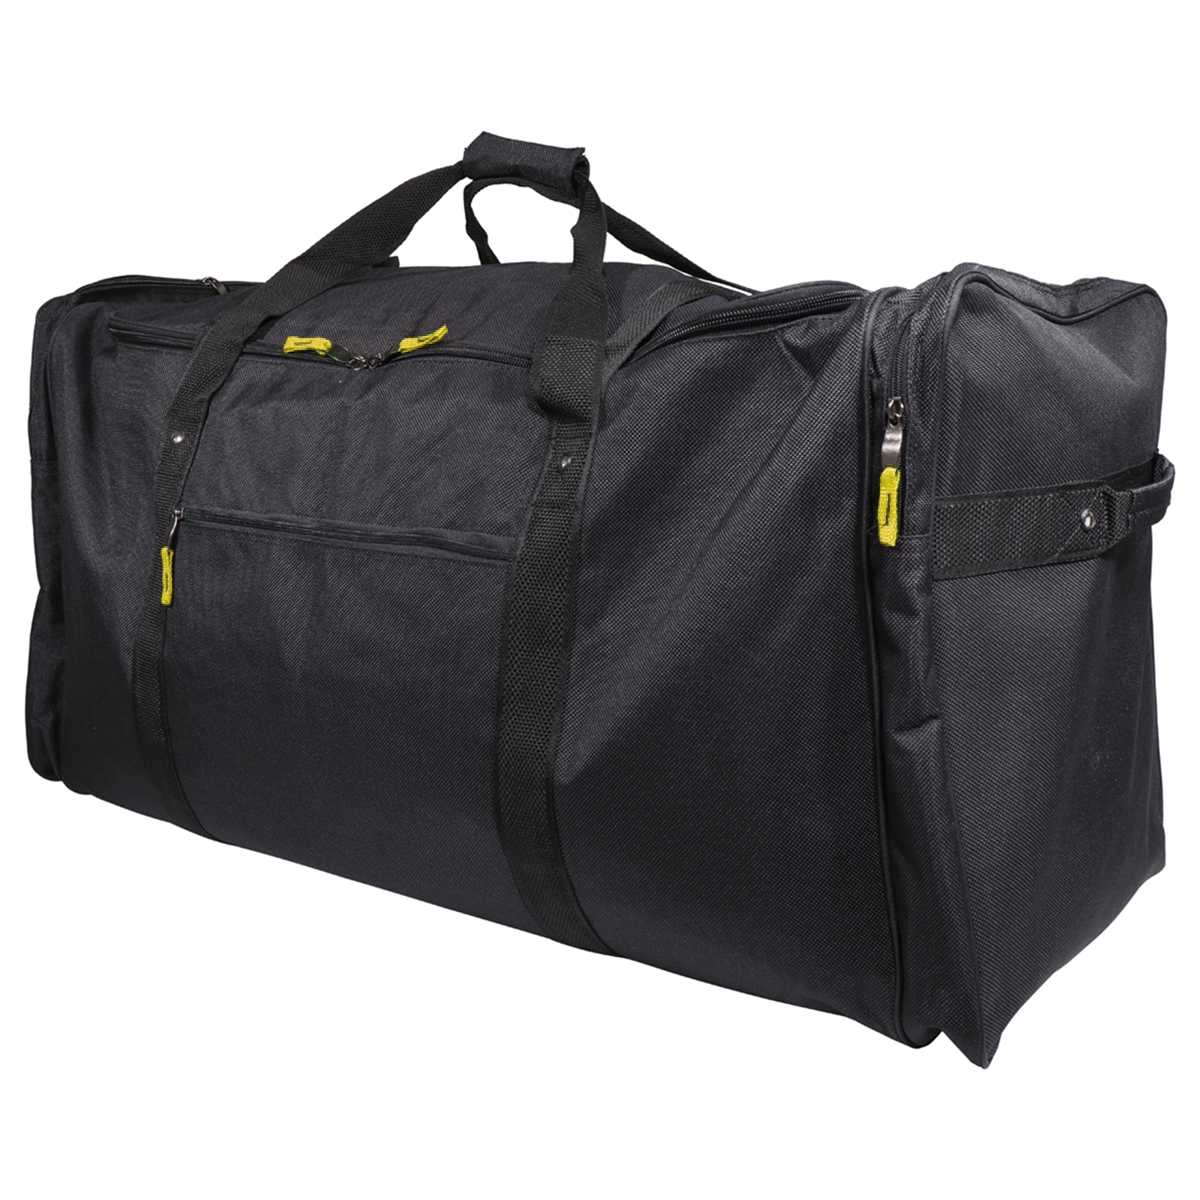 Campus Tote Holdall Guy Bags BESBOMIG Camp Overnight Cargo Duffel Bag For Dance